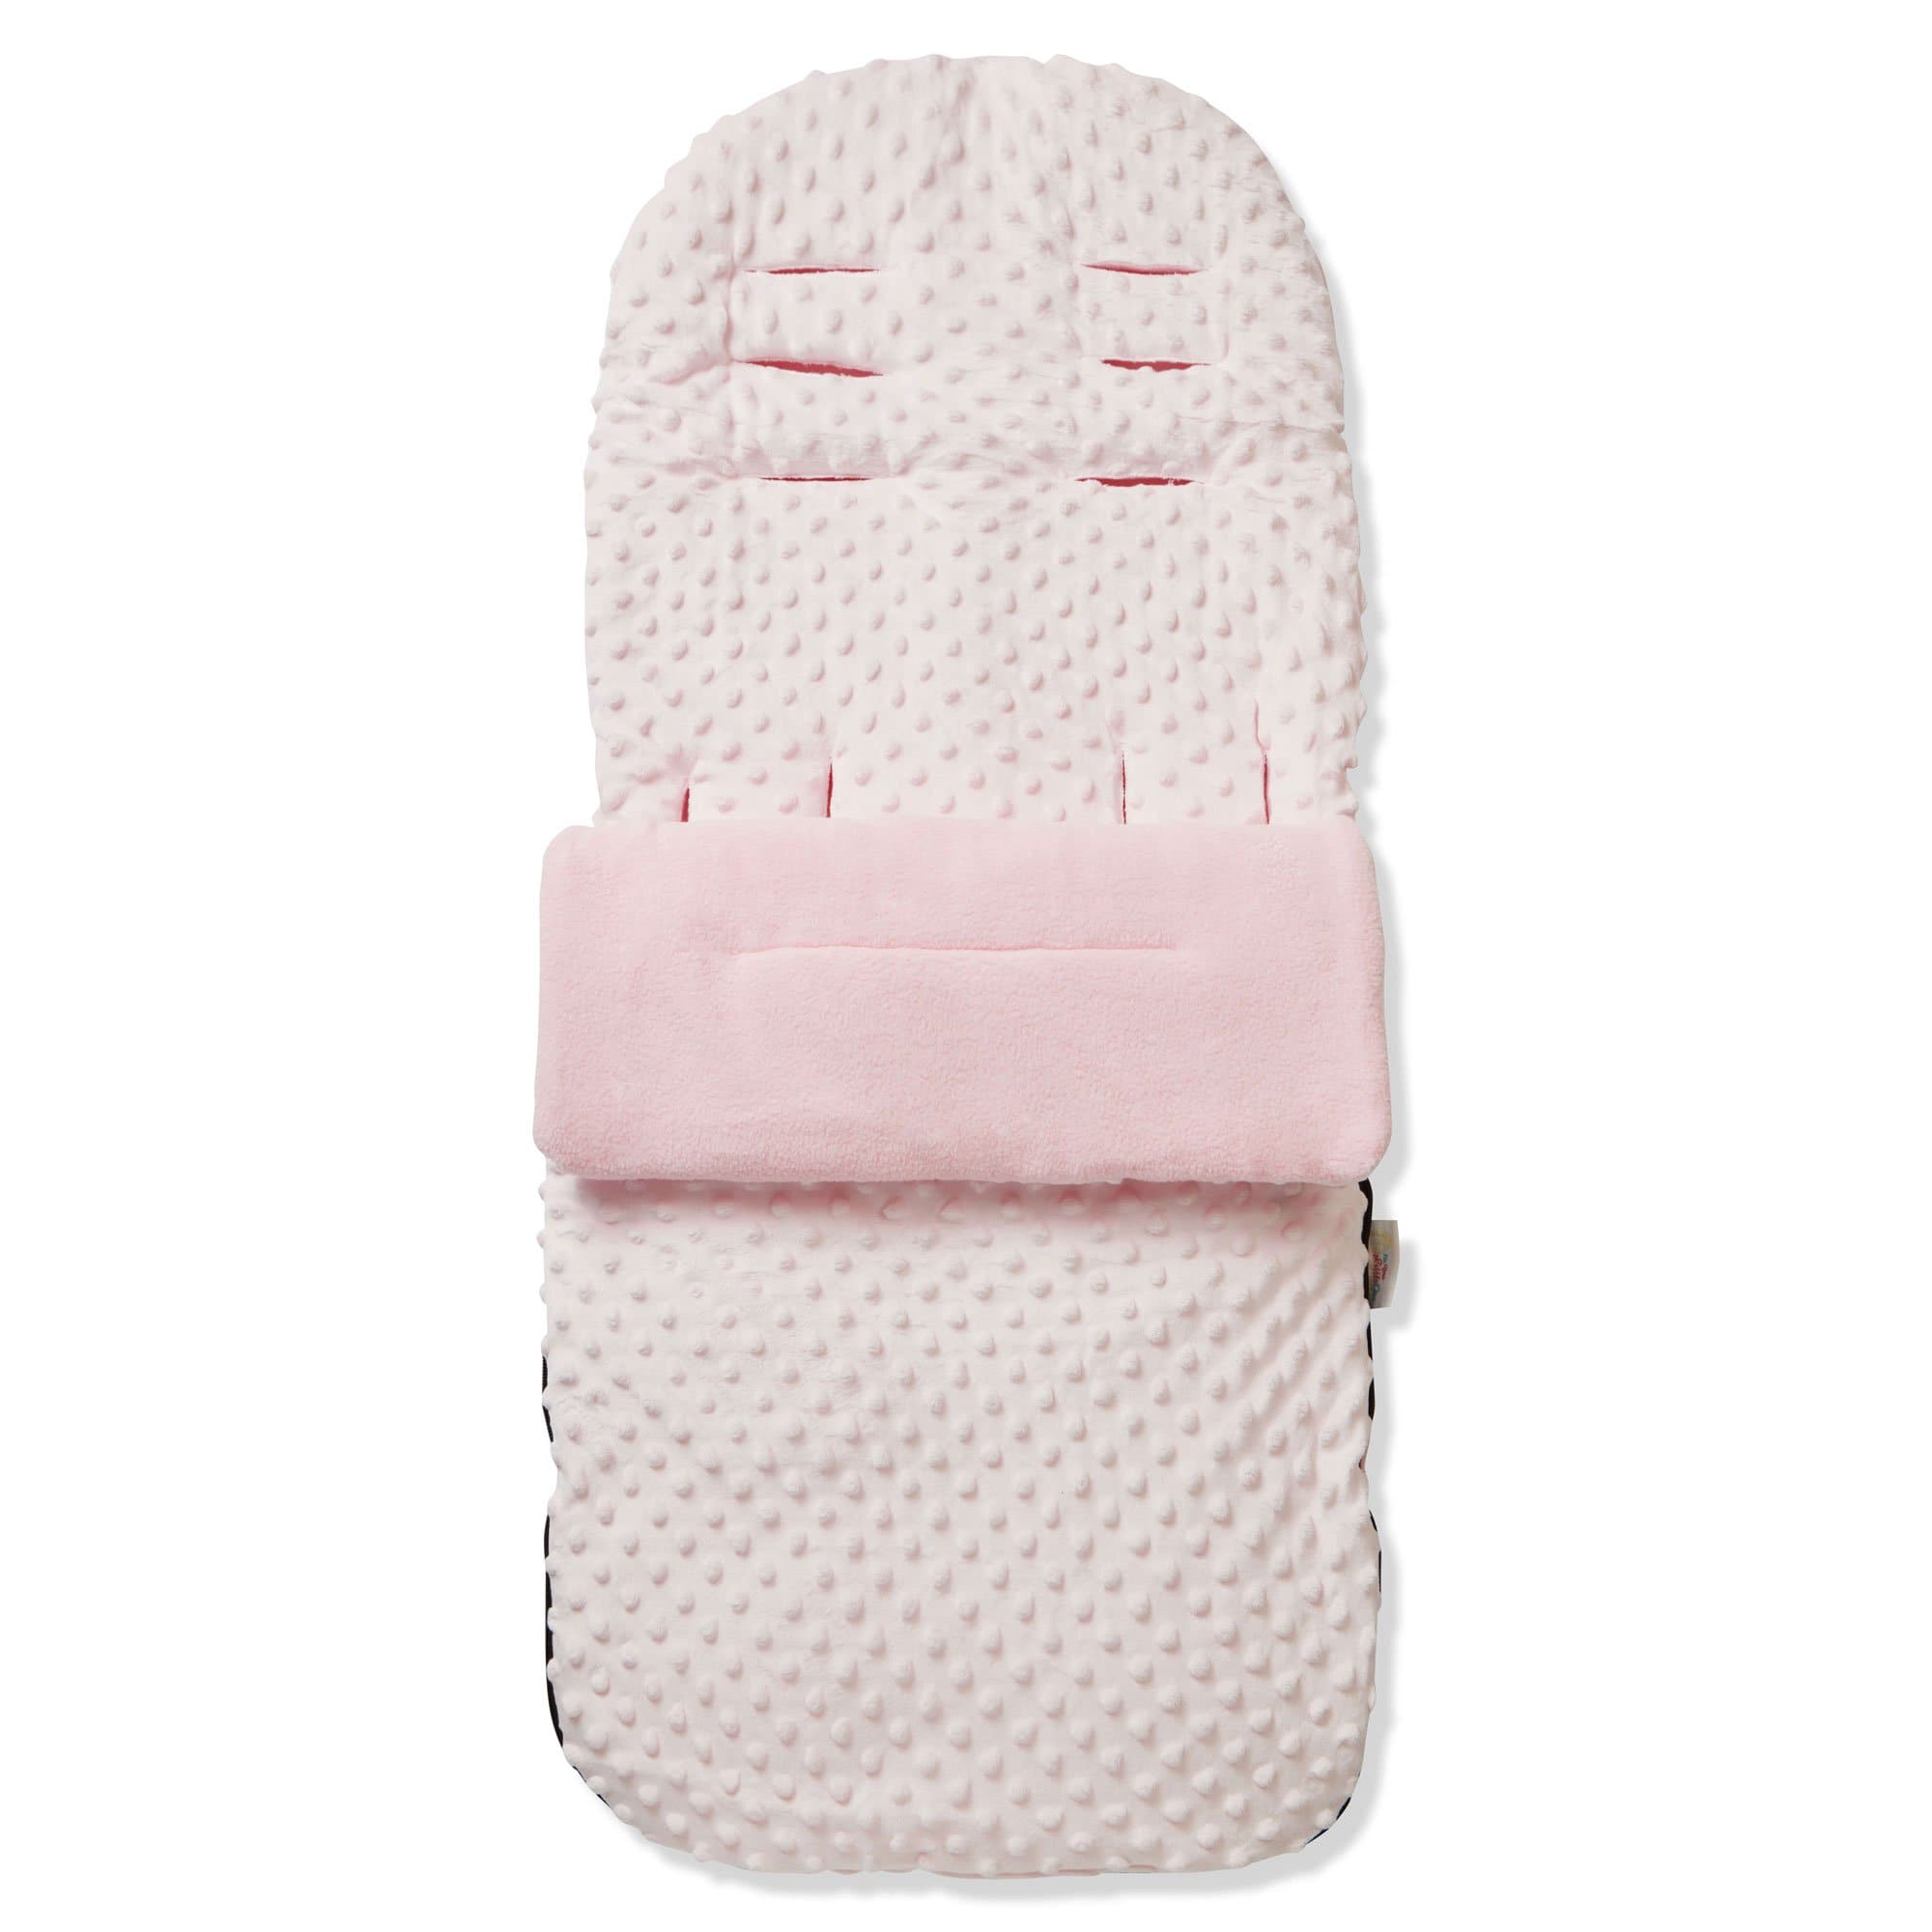 Dimple Footmuff / Cosy Toes Compatible with Baby Trend - Pink / Fits All Models | For Your Little One